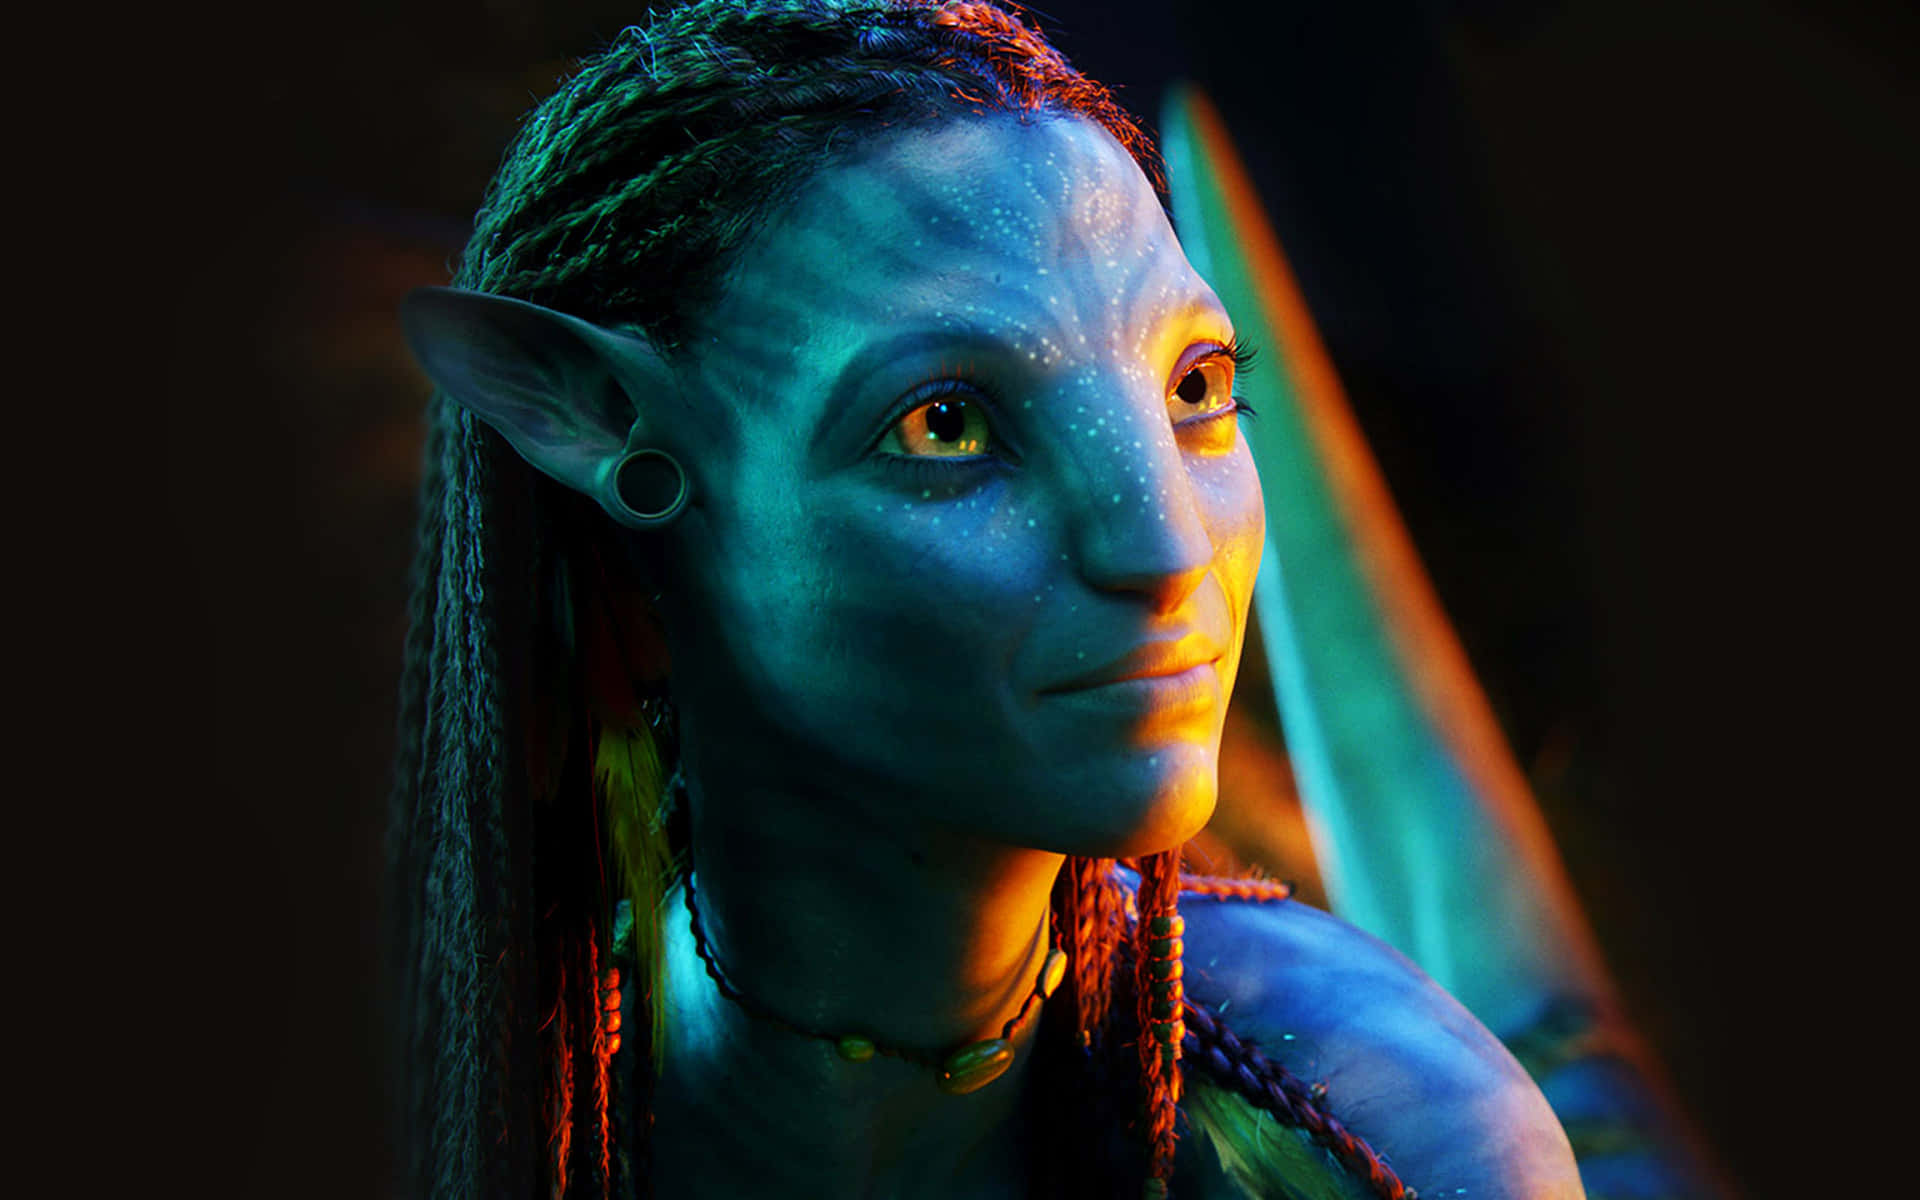 An image from the planet Pandora in the movie Avatar